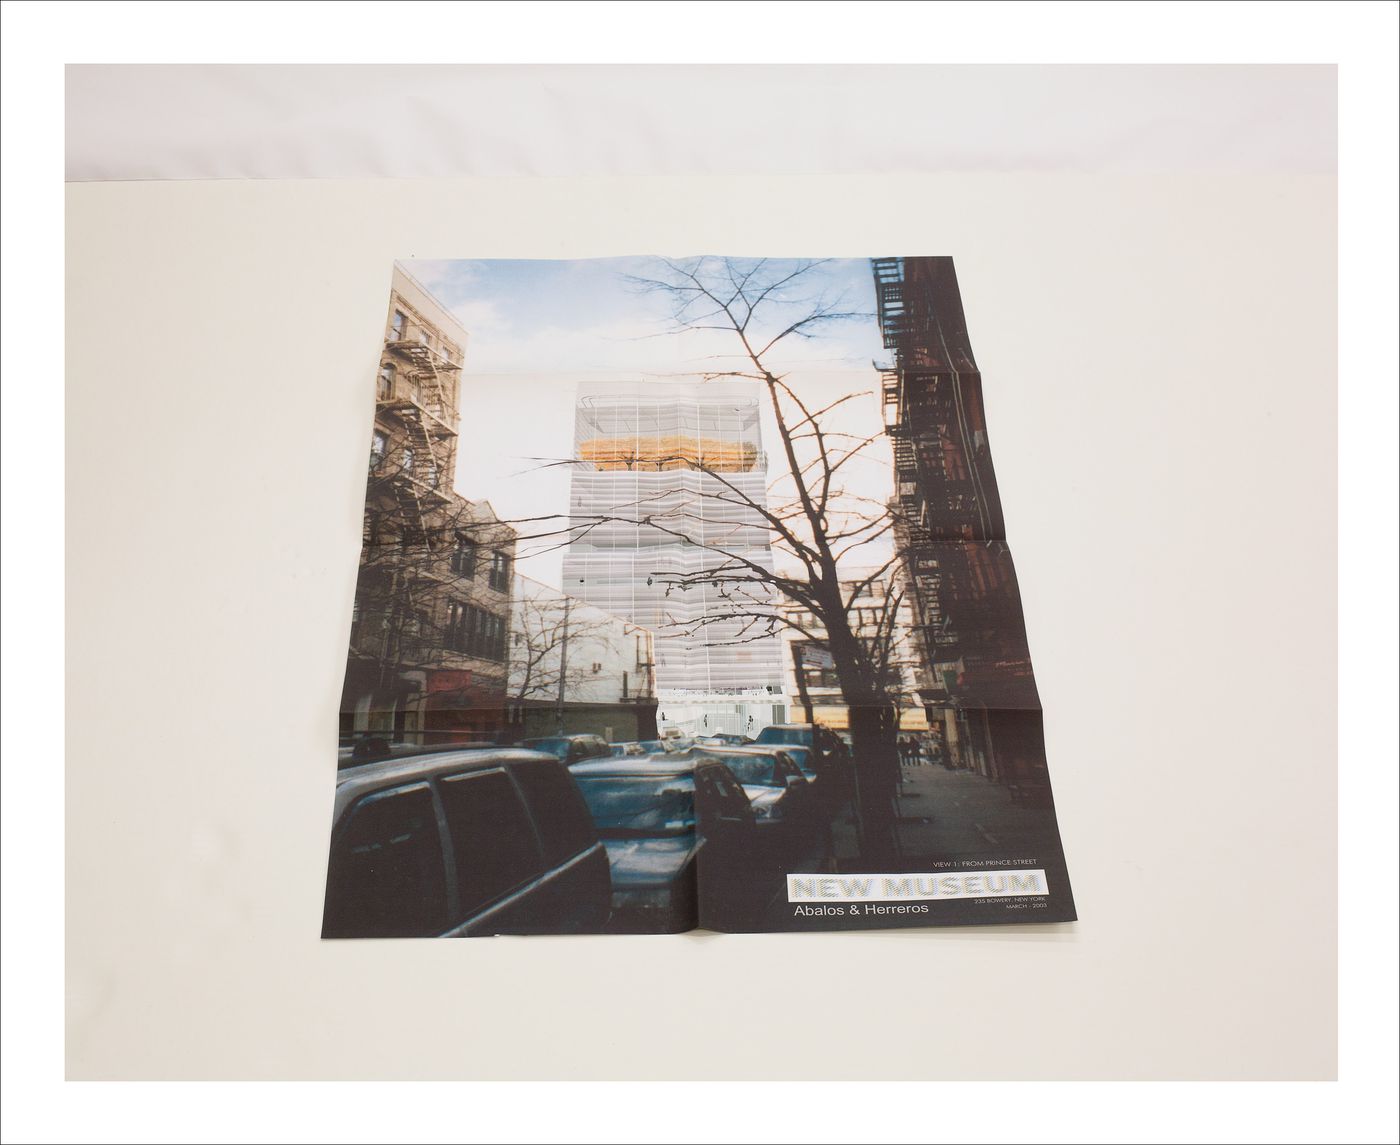 Proofs of Relevance: View of a poster showing a photomontage of the New Museum of Contemporary Art competition project, New York City, Abalos & Herreros (2002-2003)